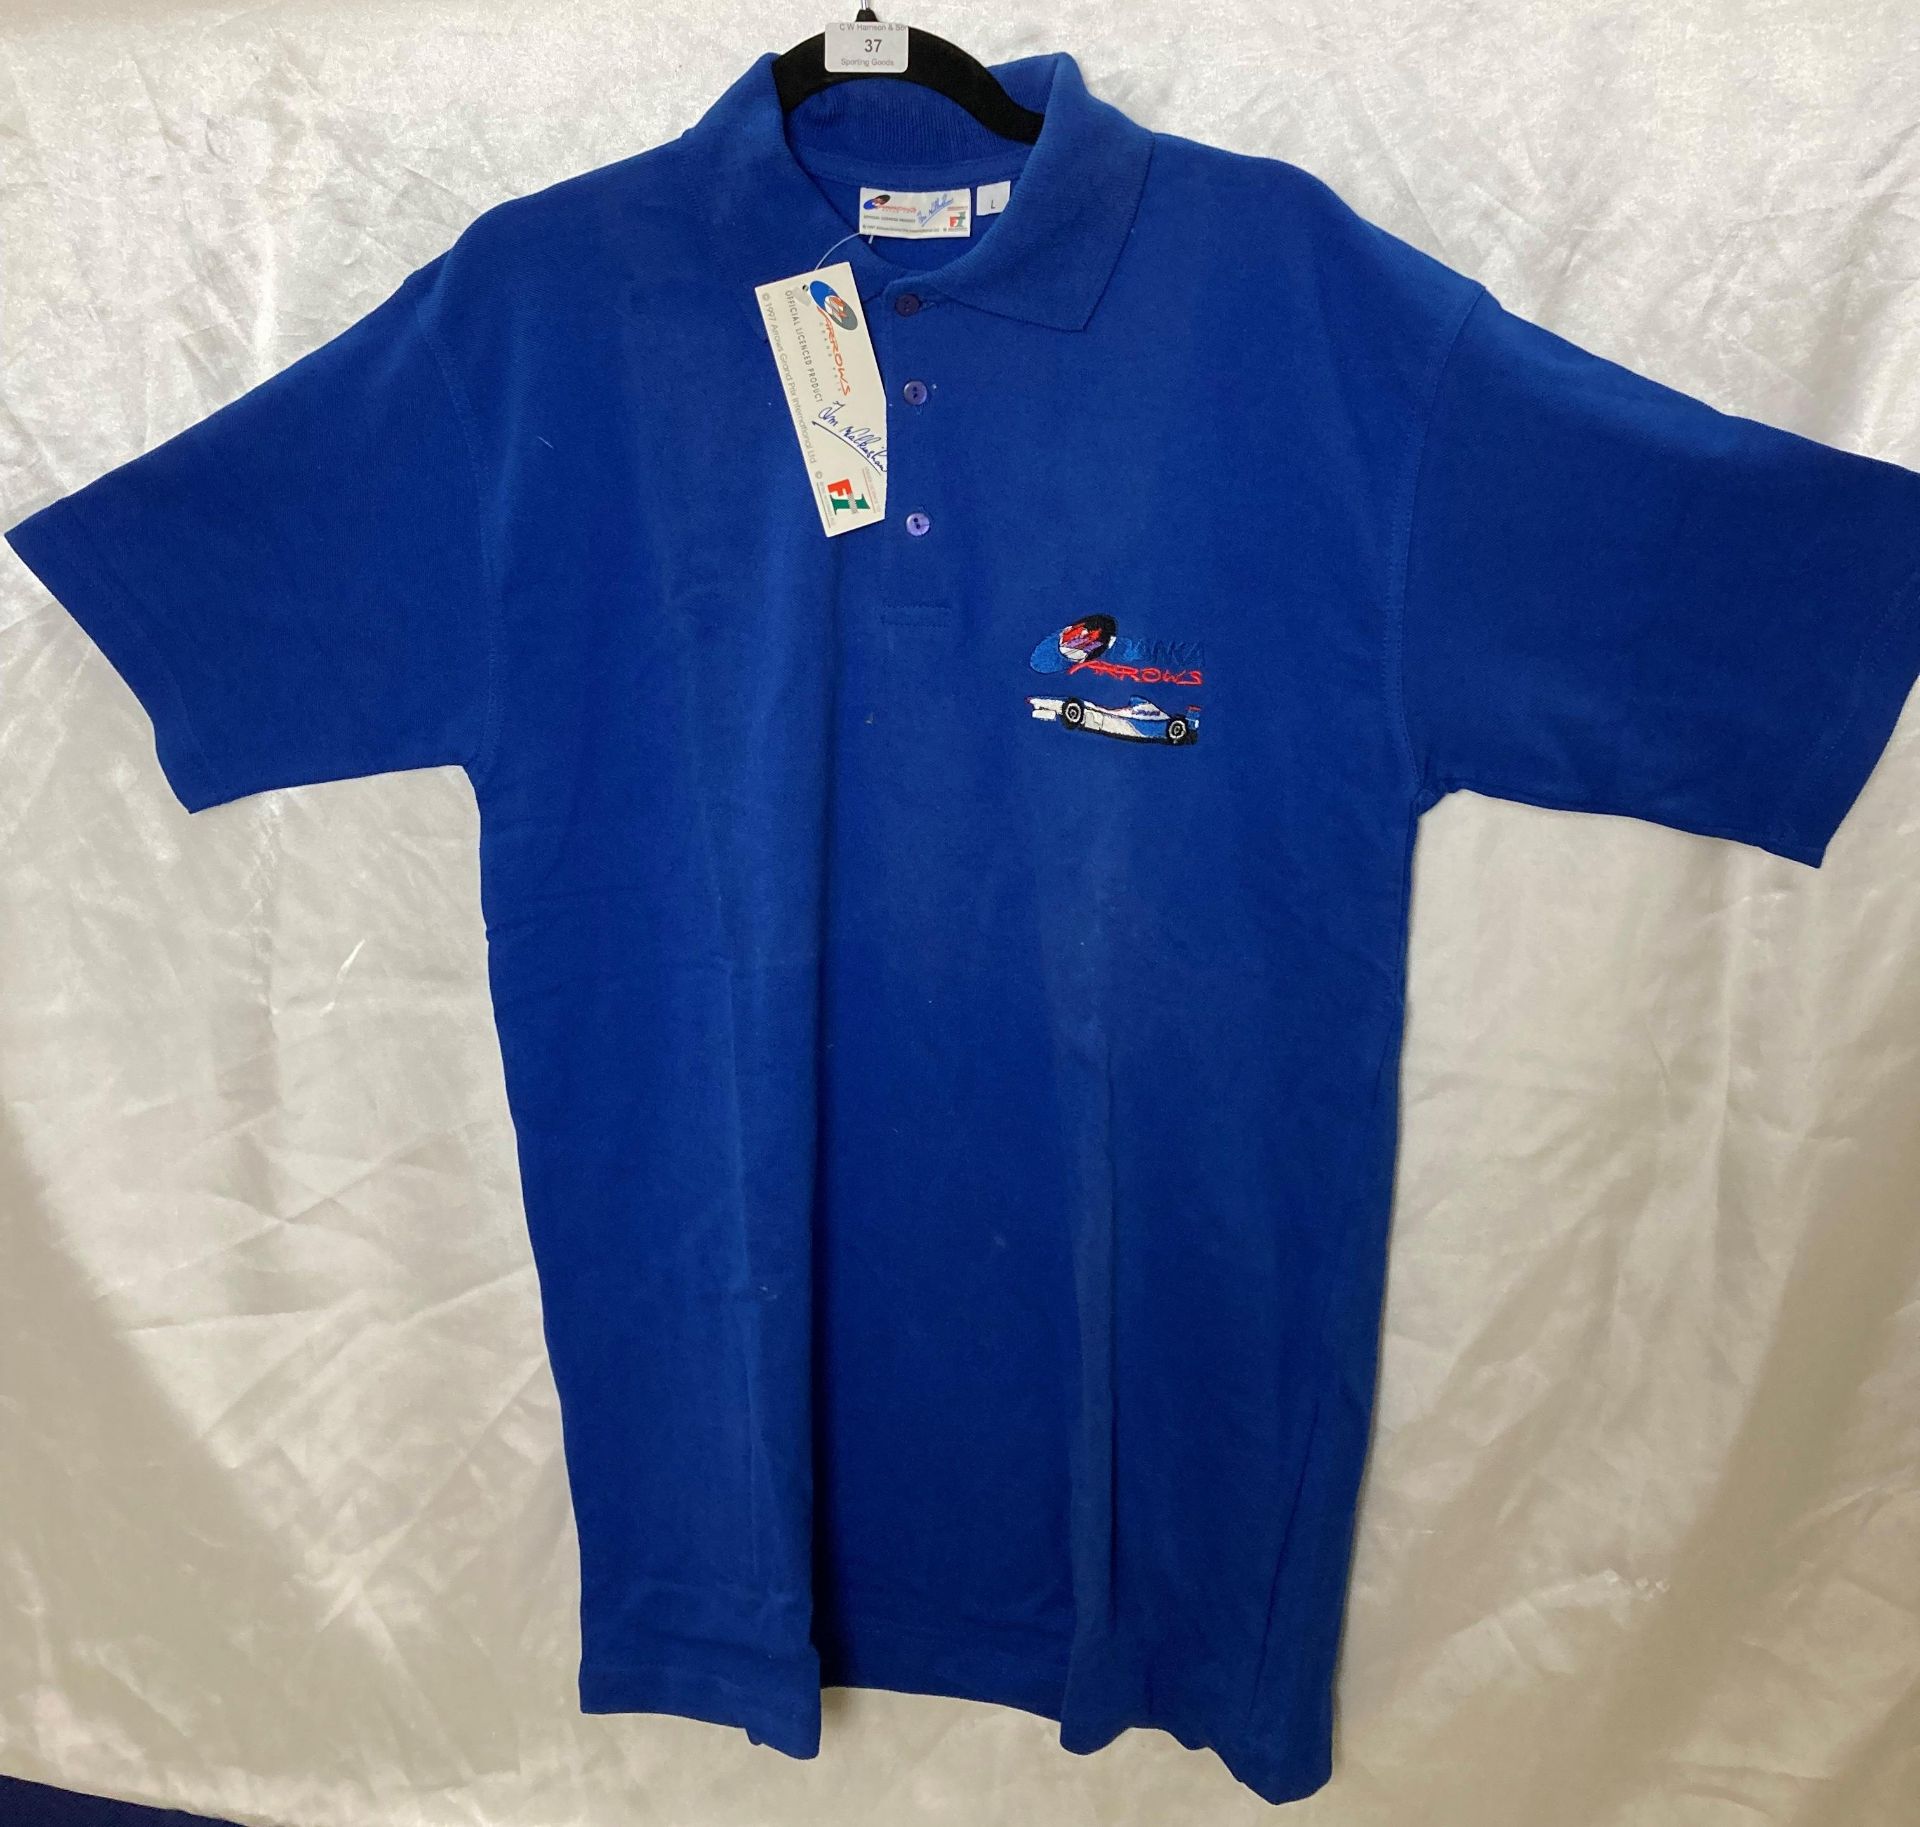 60 x assorted sized 1997 Arrows F1 Team polo shirts in blue